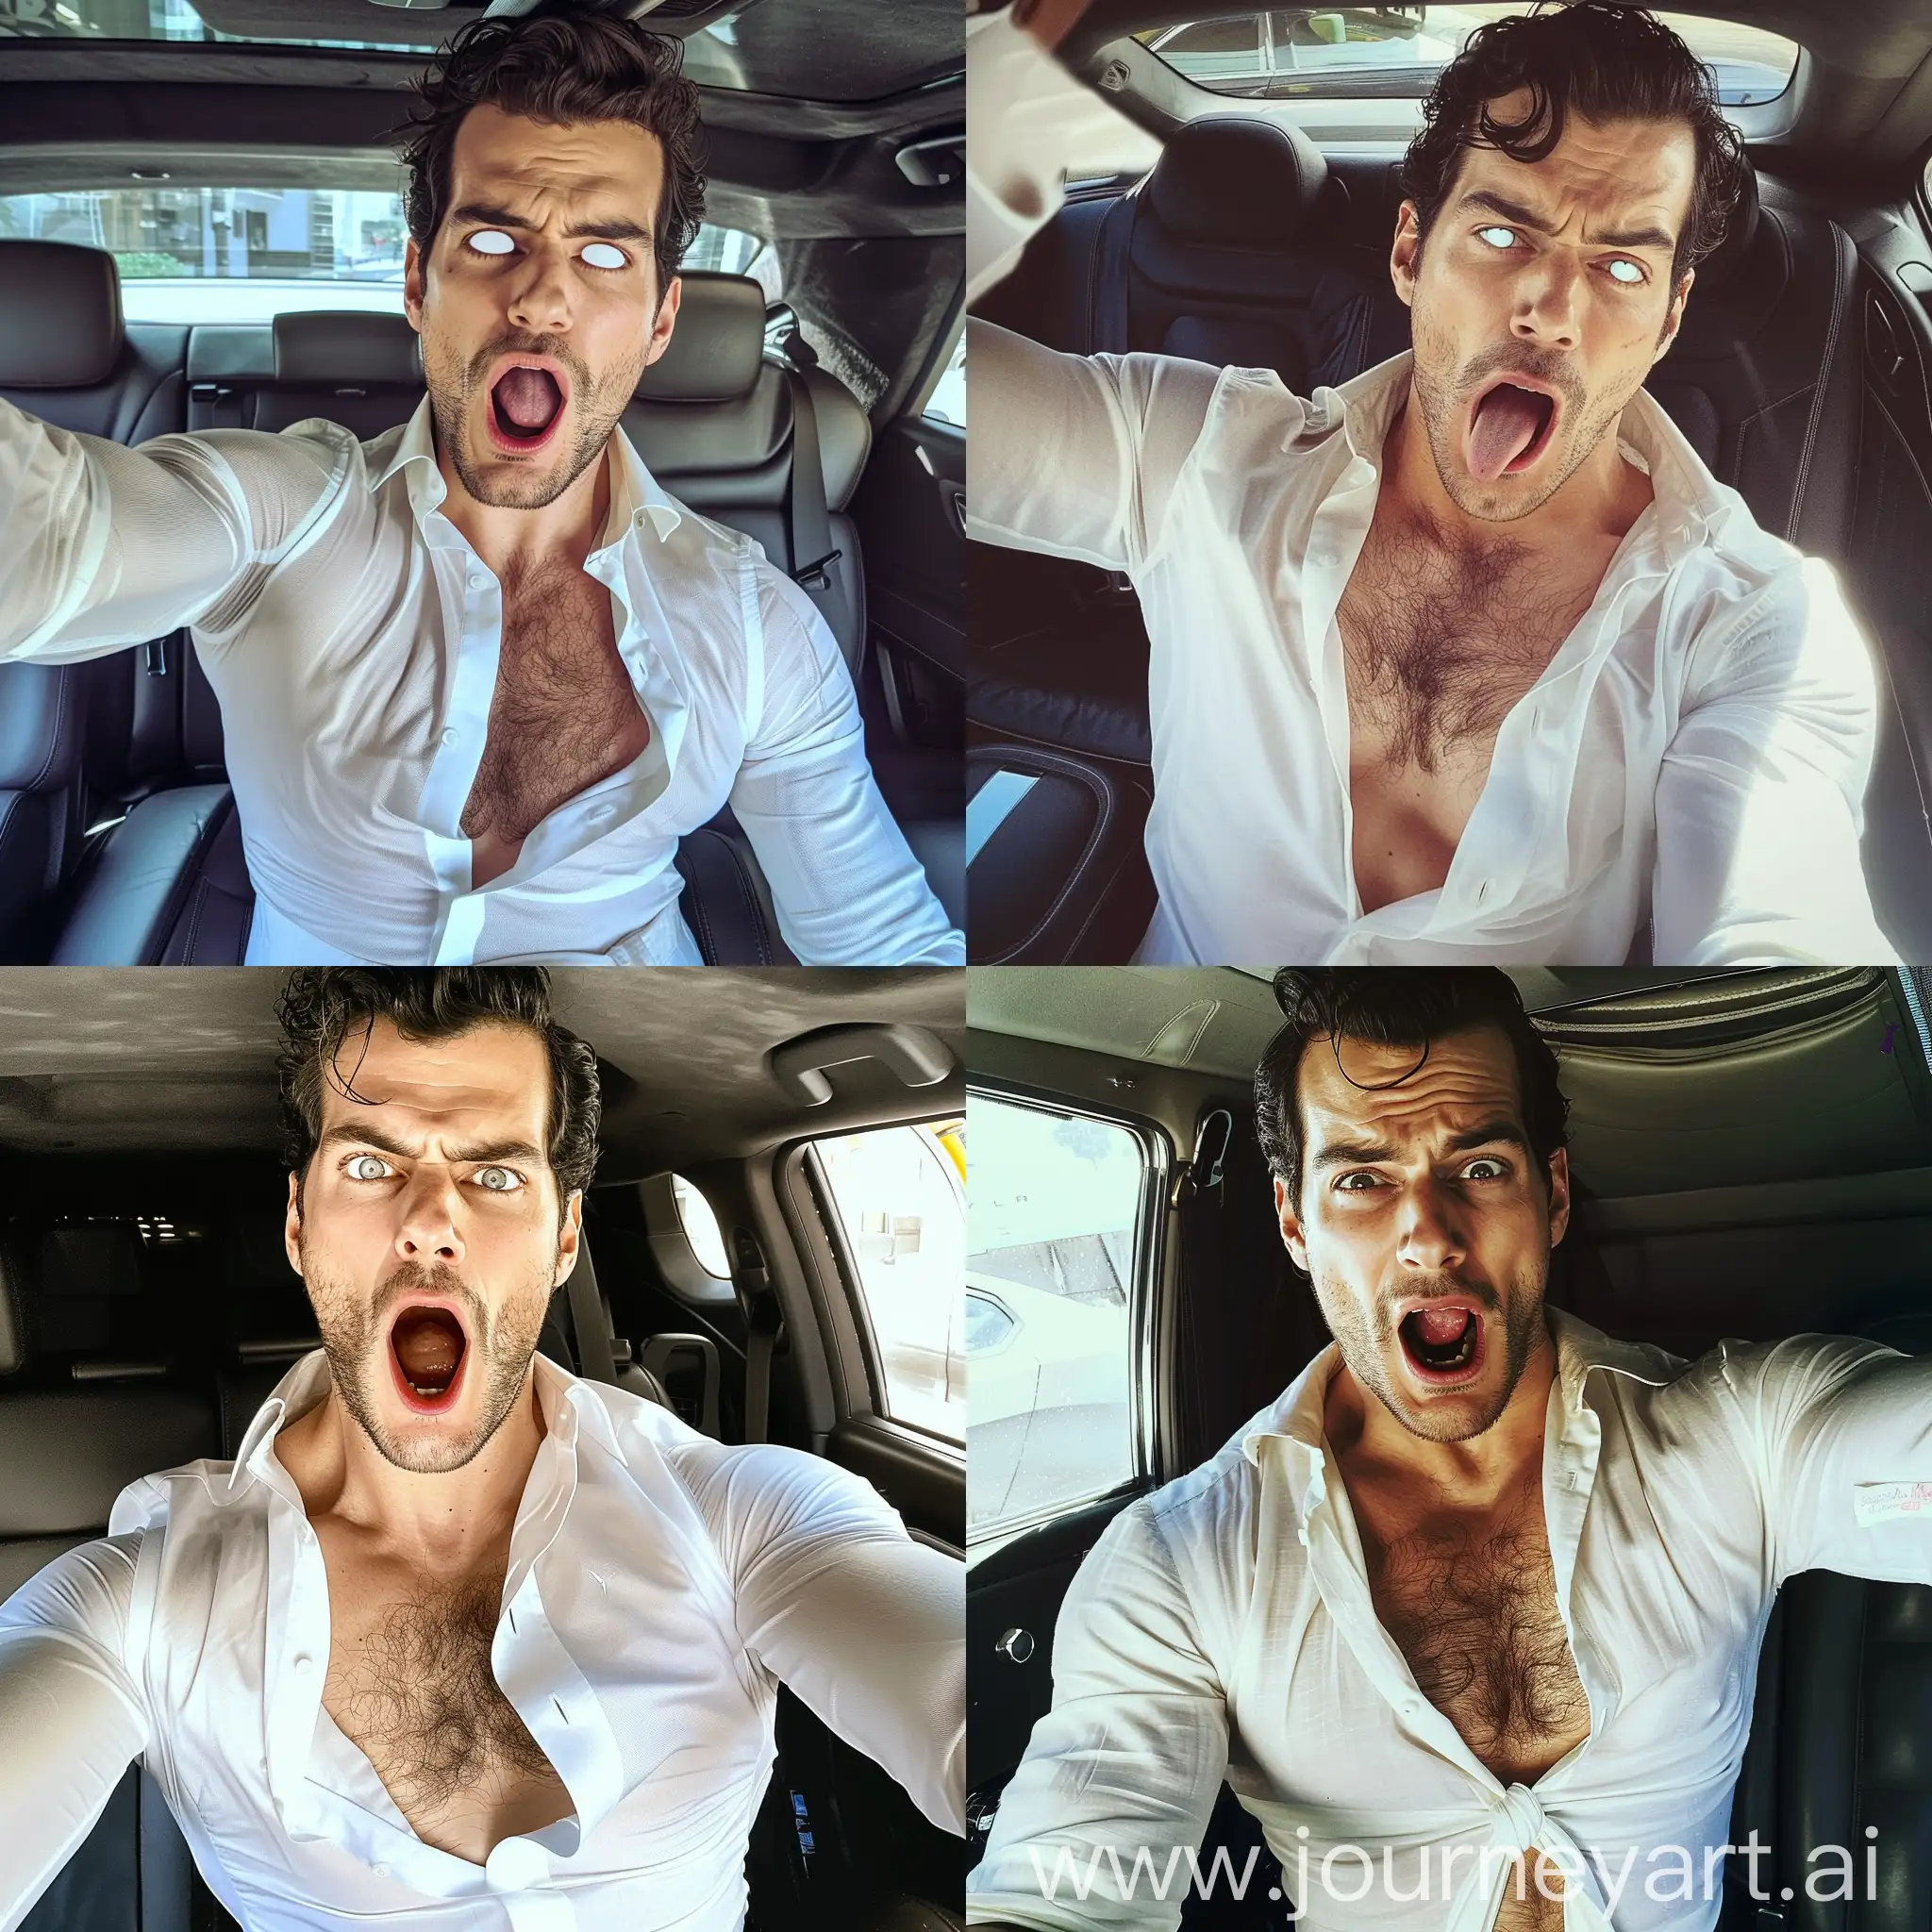 Henry-Cavill-Selfie-in-Car-Yawning-Expression-and-White-Dress-Shirt